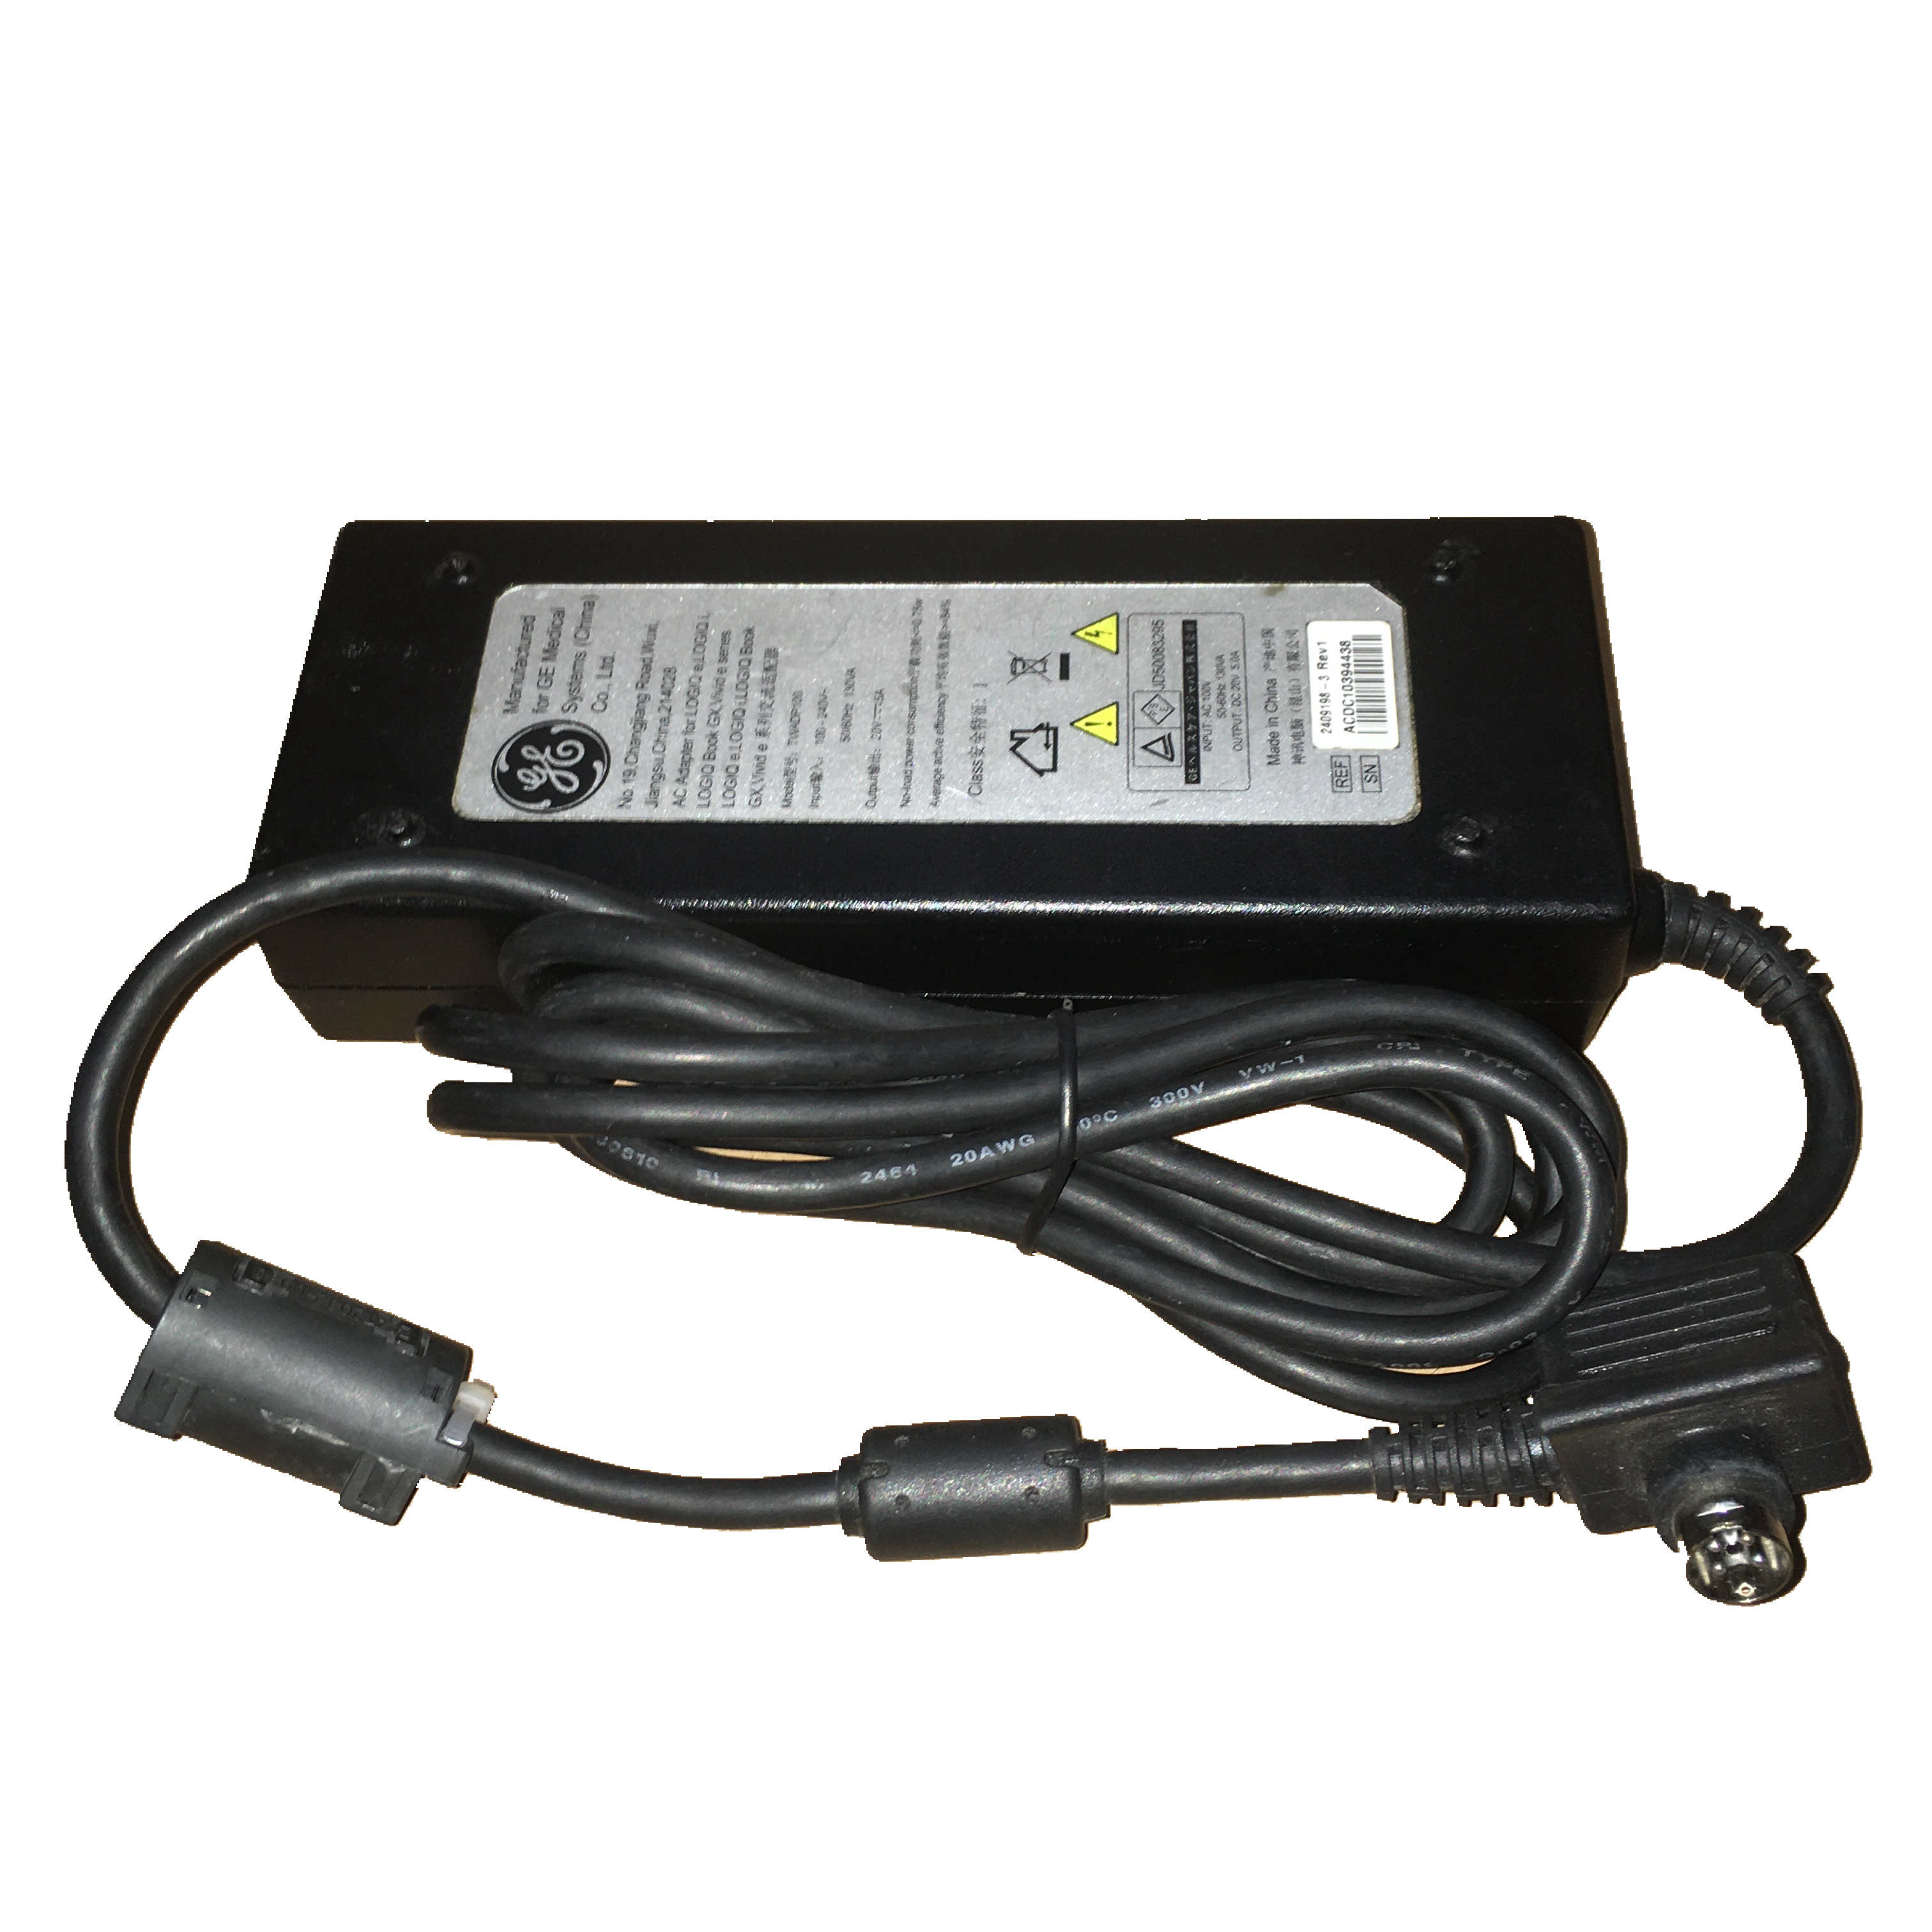 *Brand NEW* AC100-240V 50/60Hz GE LOGIQ e TWADP100 20V 5A AC DC ADAPTER POWER SUPPLY - Click Image to Close